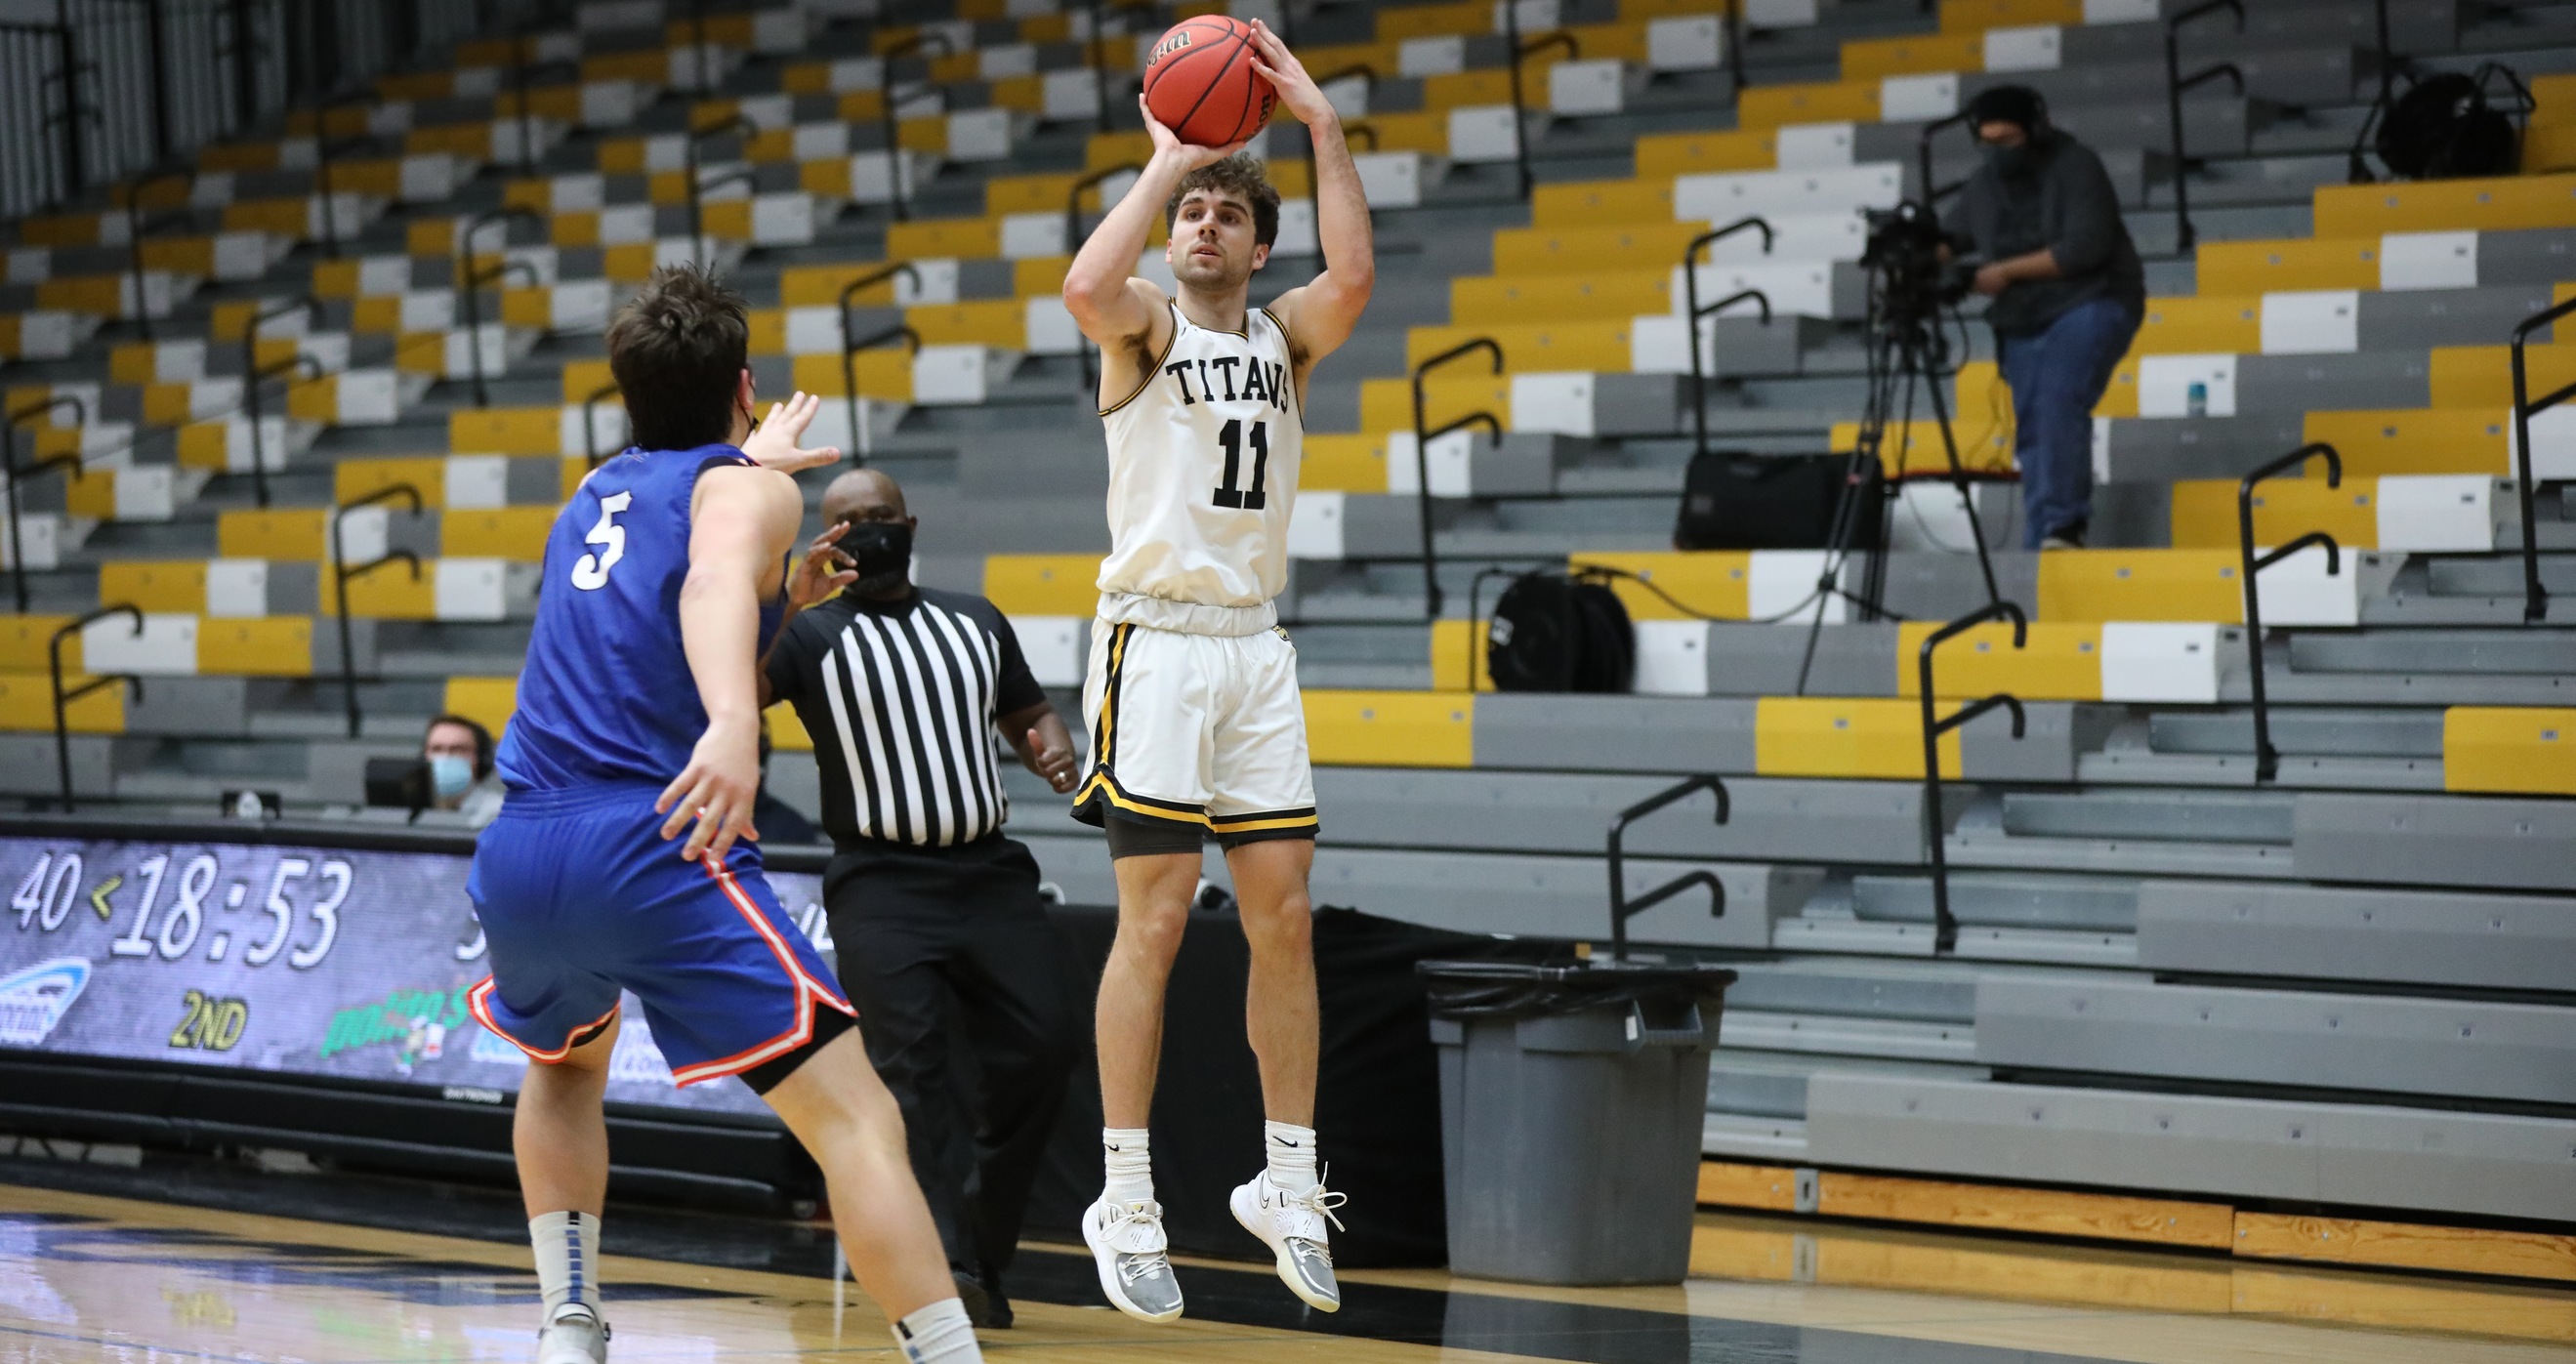 Eric Peterson scored 17 points against the Pioneers on 6-for-7 shooting from the field, including 4-for-5 from 3-point range.